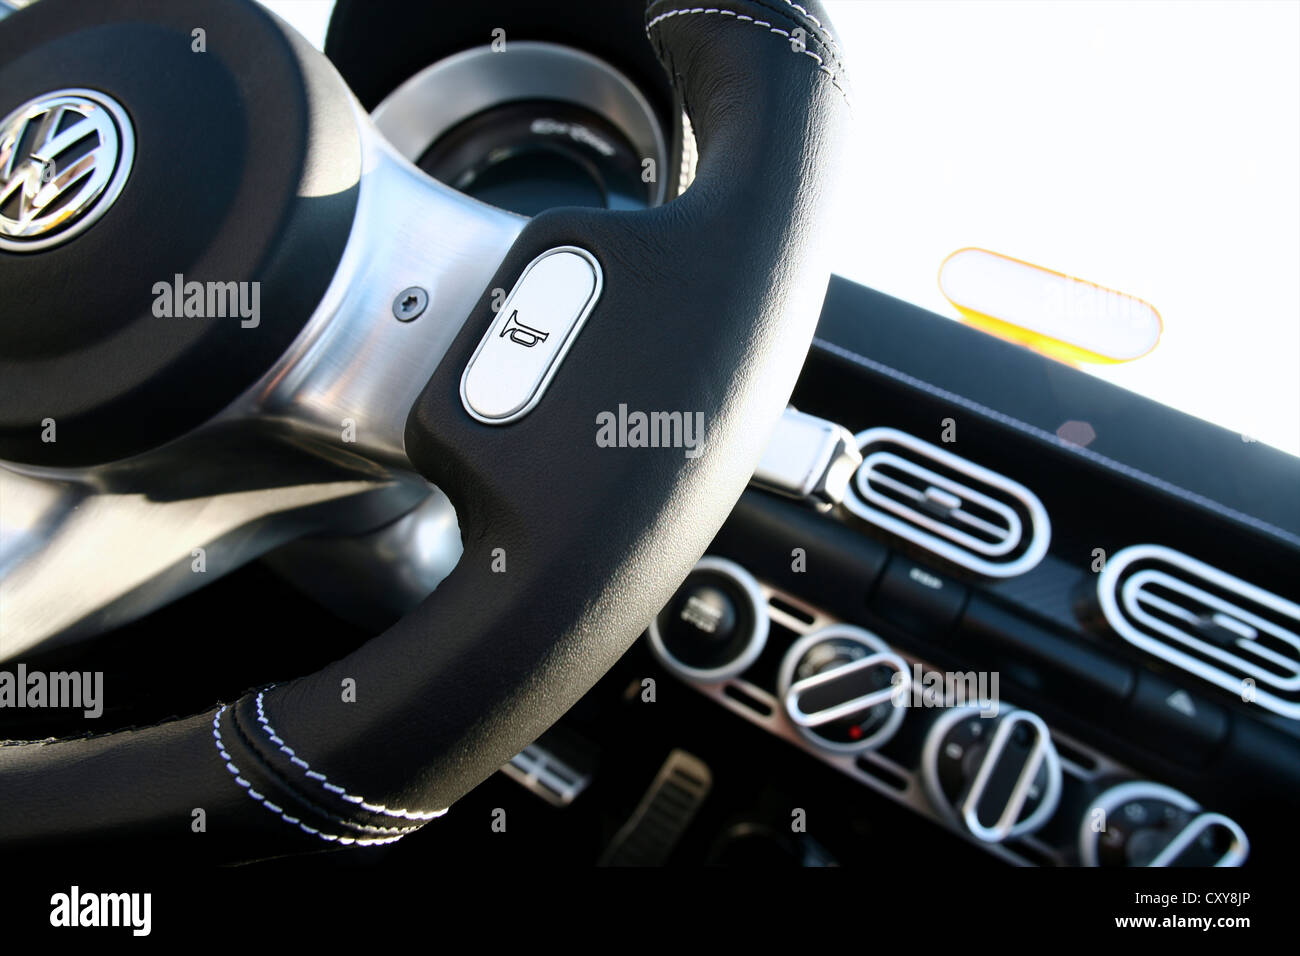 Dashboard Steering Wheel Volkswagen Vw High Resolution Stock Photography  and Images - Alamy